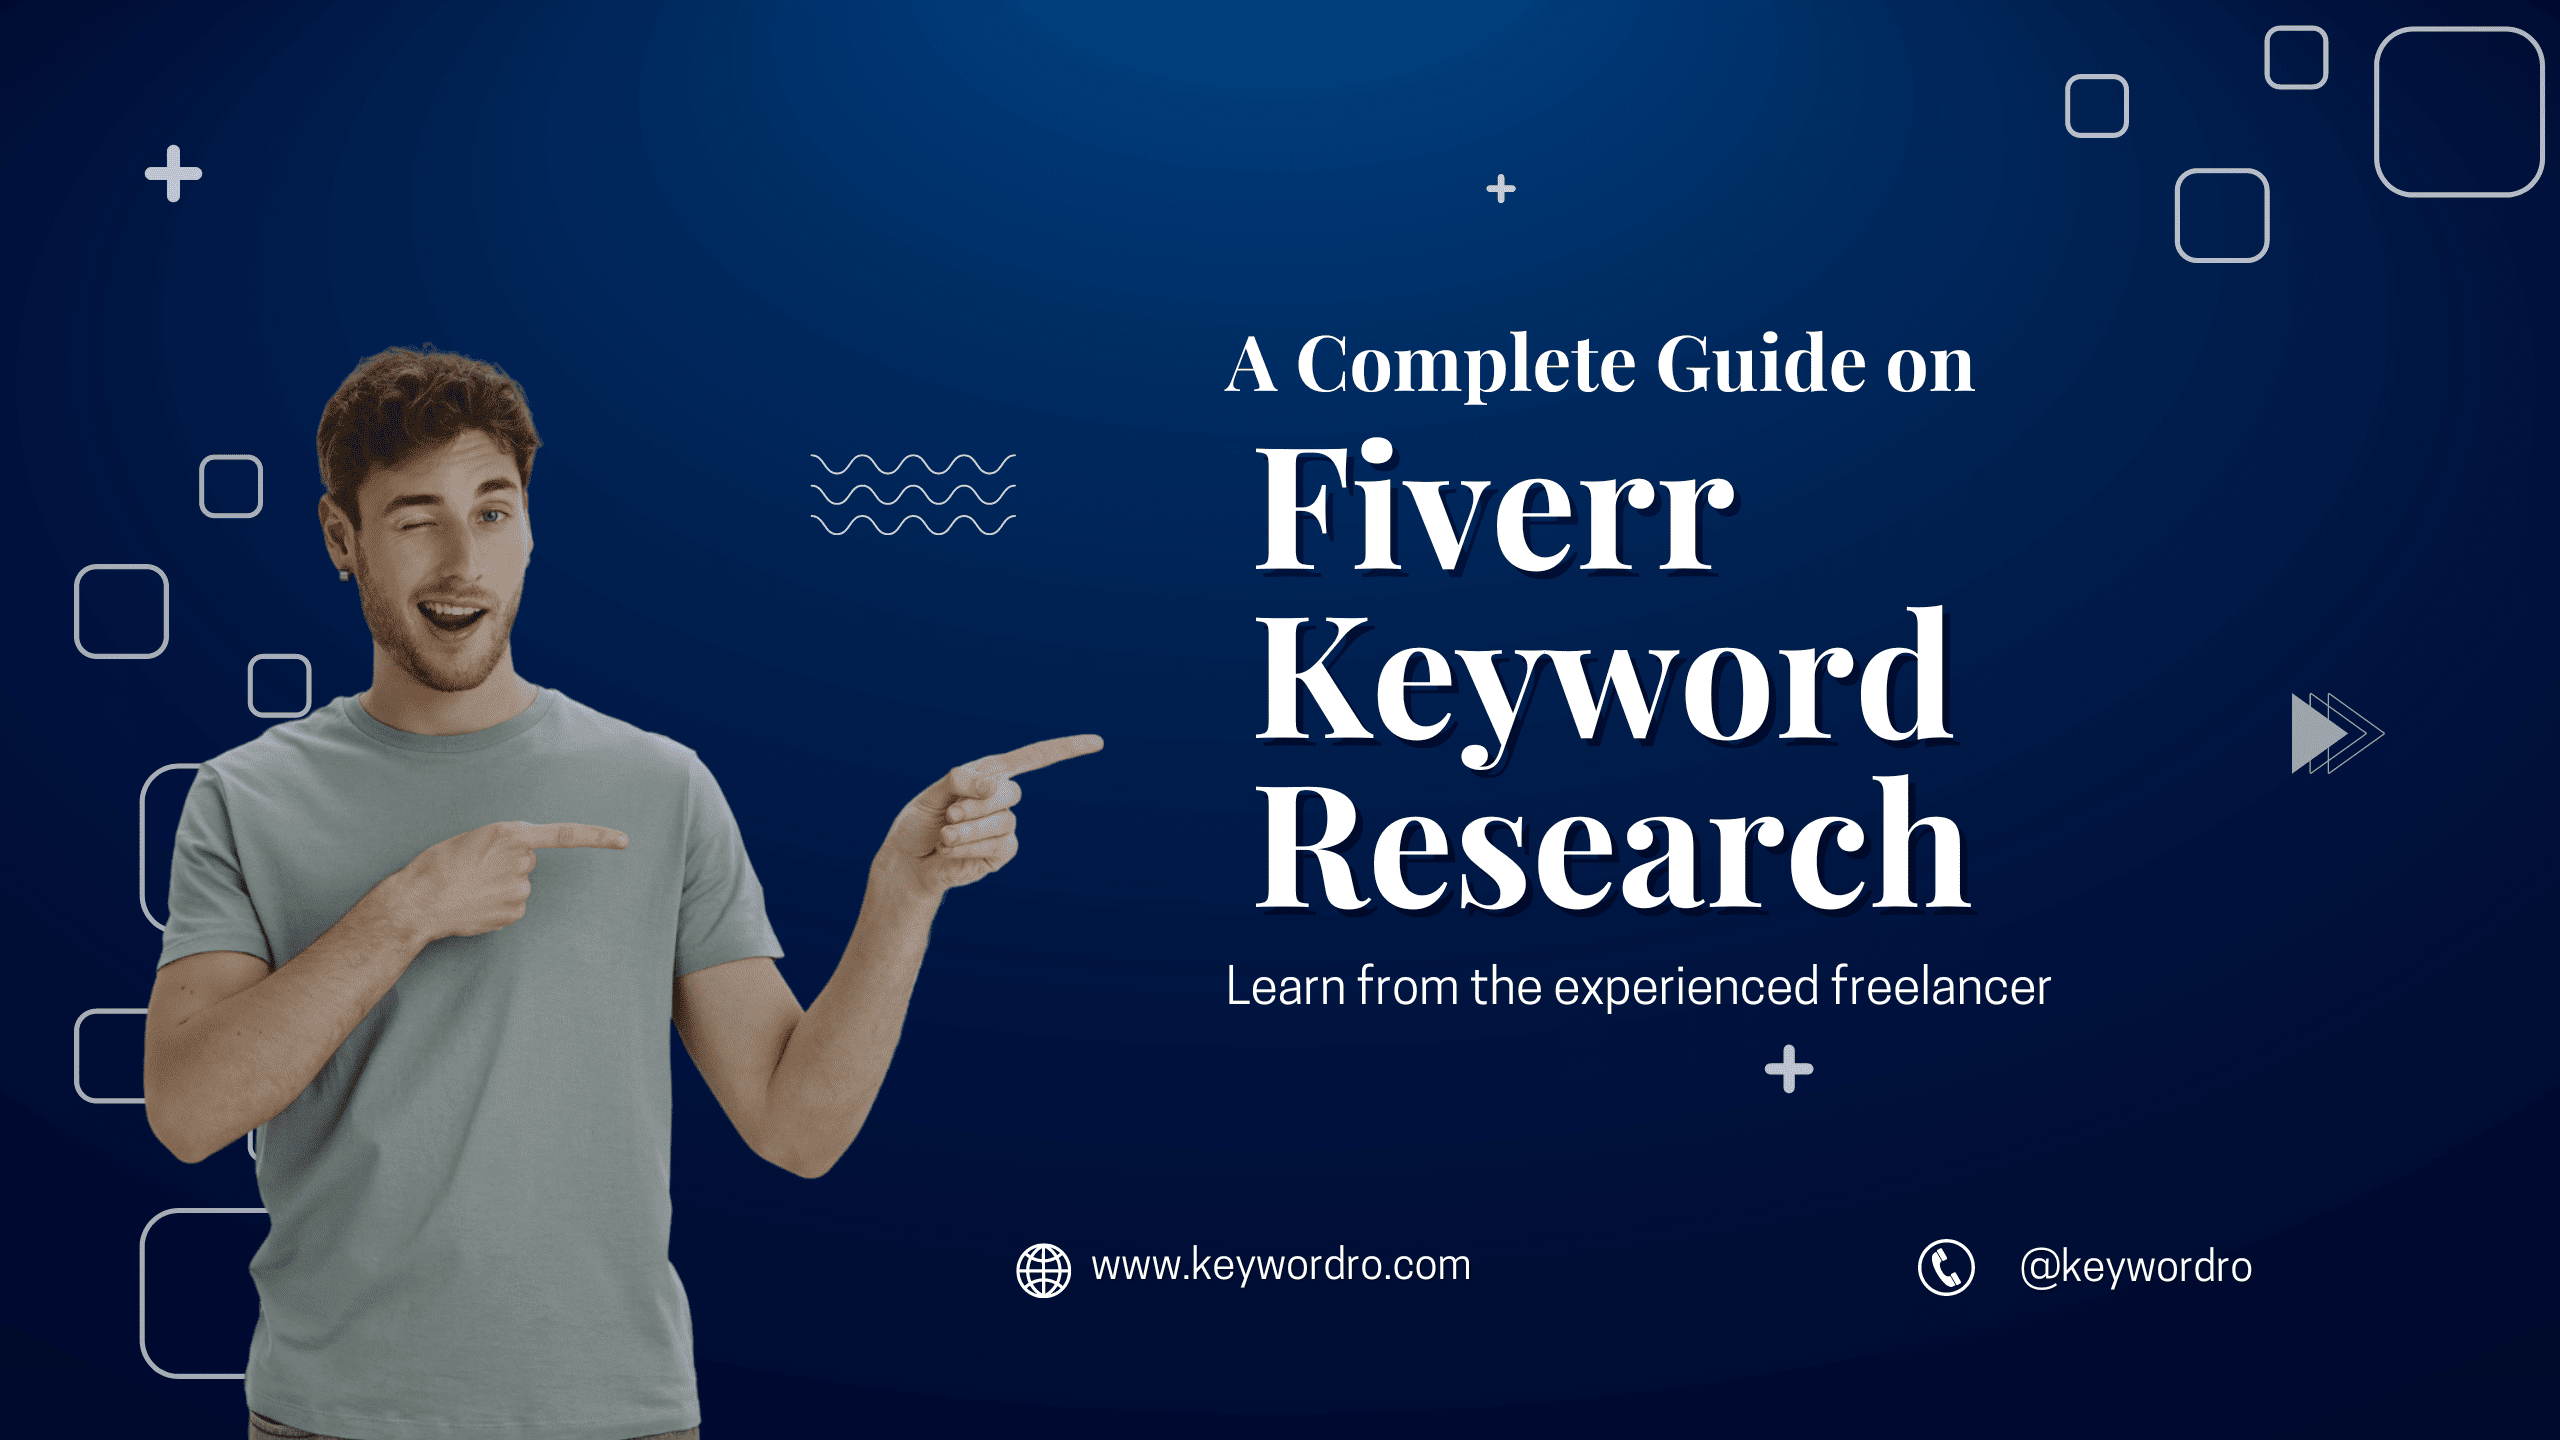 A Complete Guide on Fiverr Keyword Research